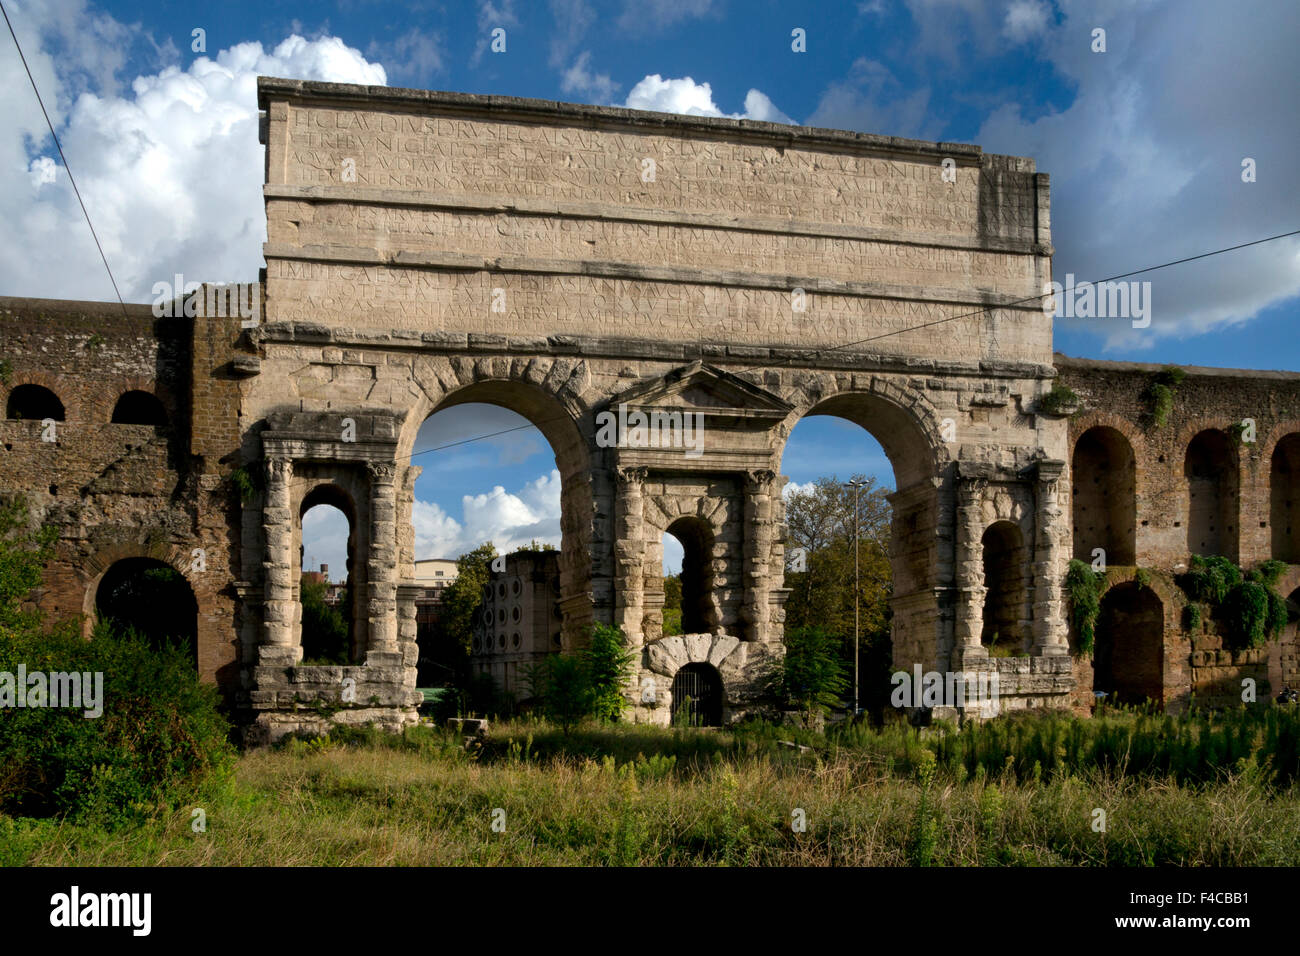 Porta Maggiore, East Gate to the city of Ancient Rome, Italy Stock Photo